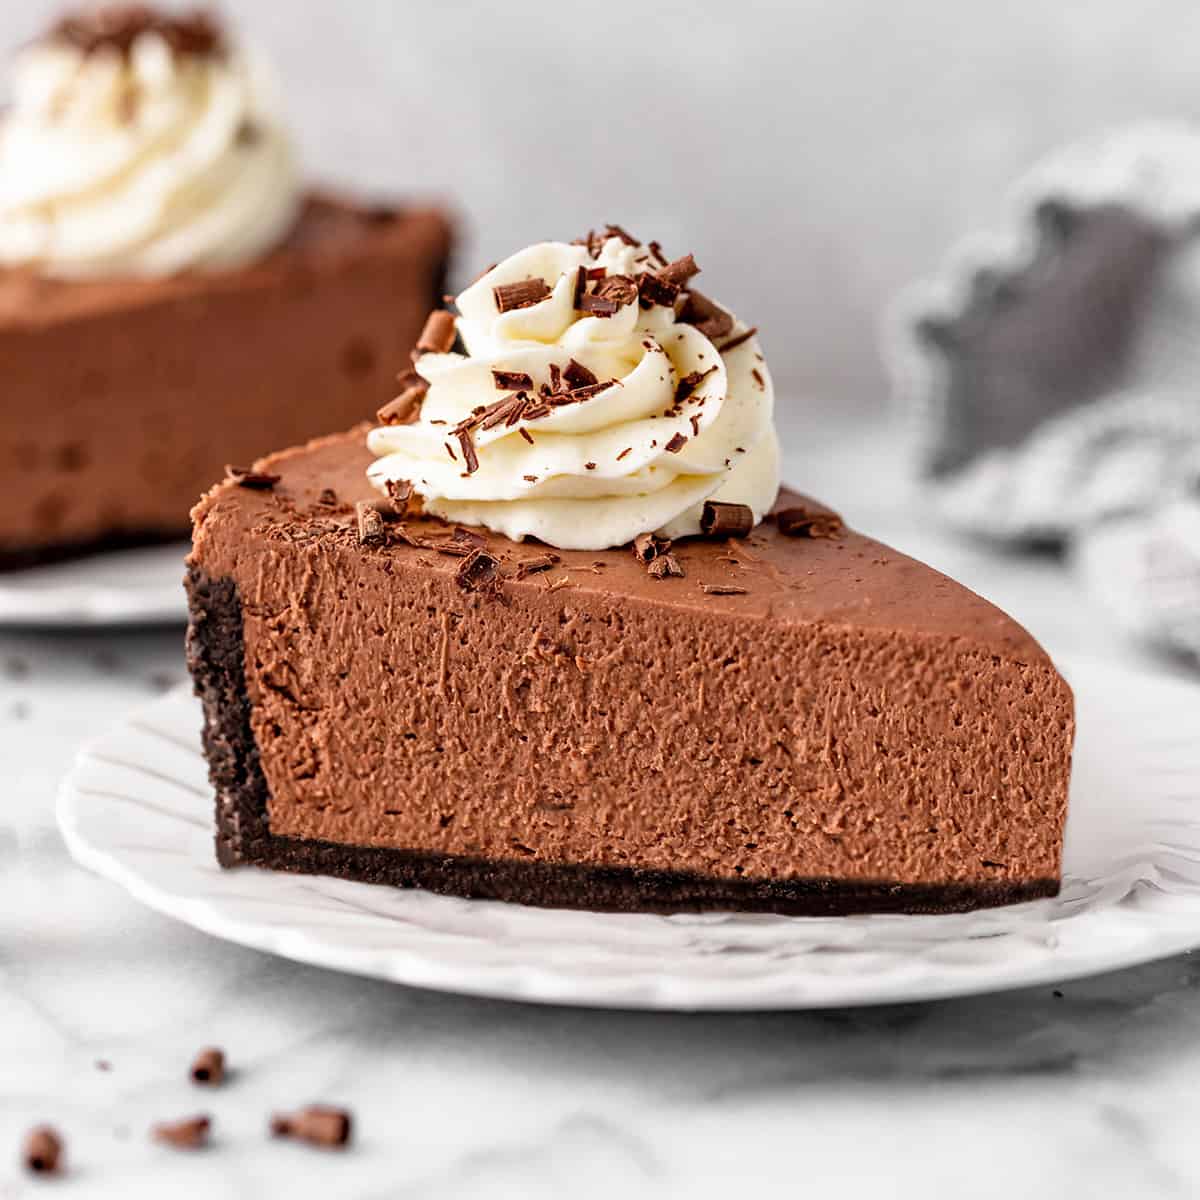 a slice of No Bake Chocolate Cheesecake on a plate with whipped cream and chocolate shavings